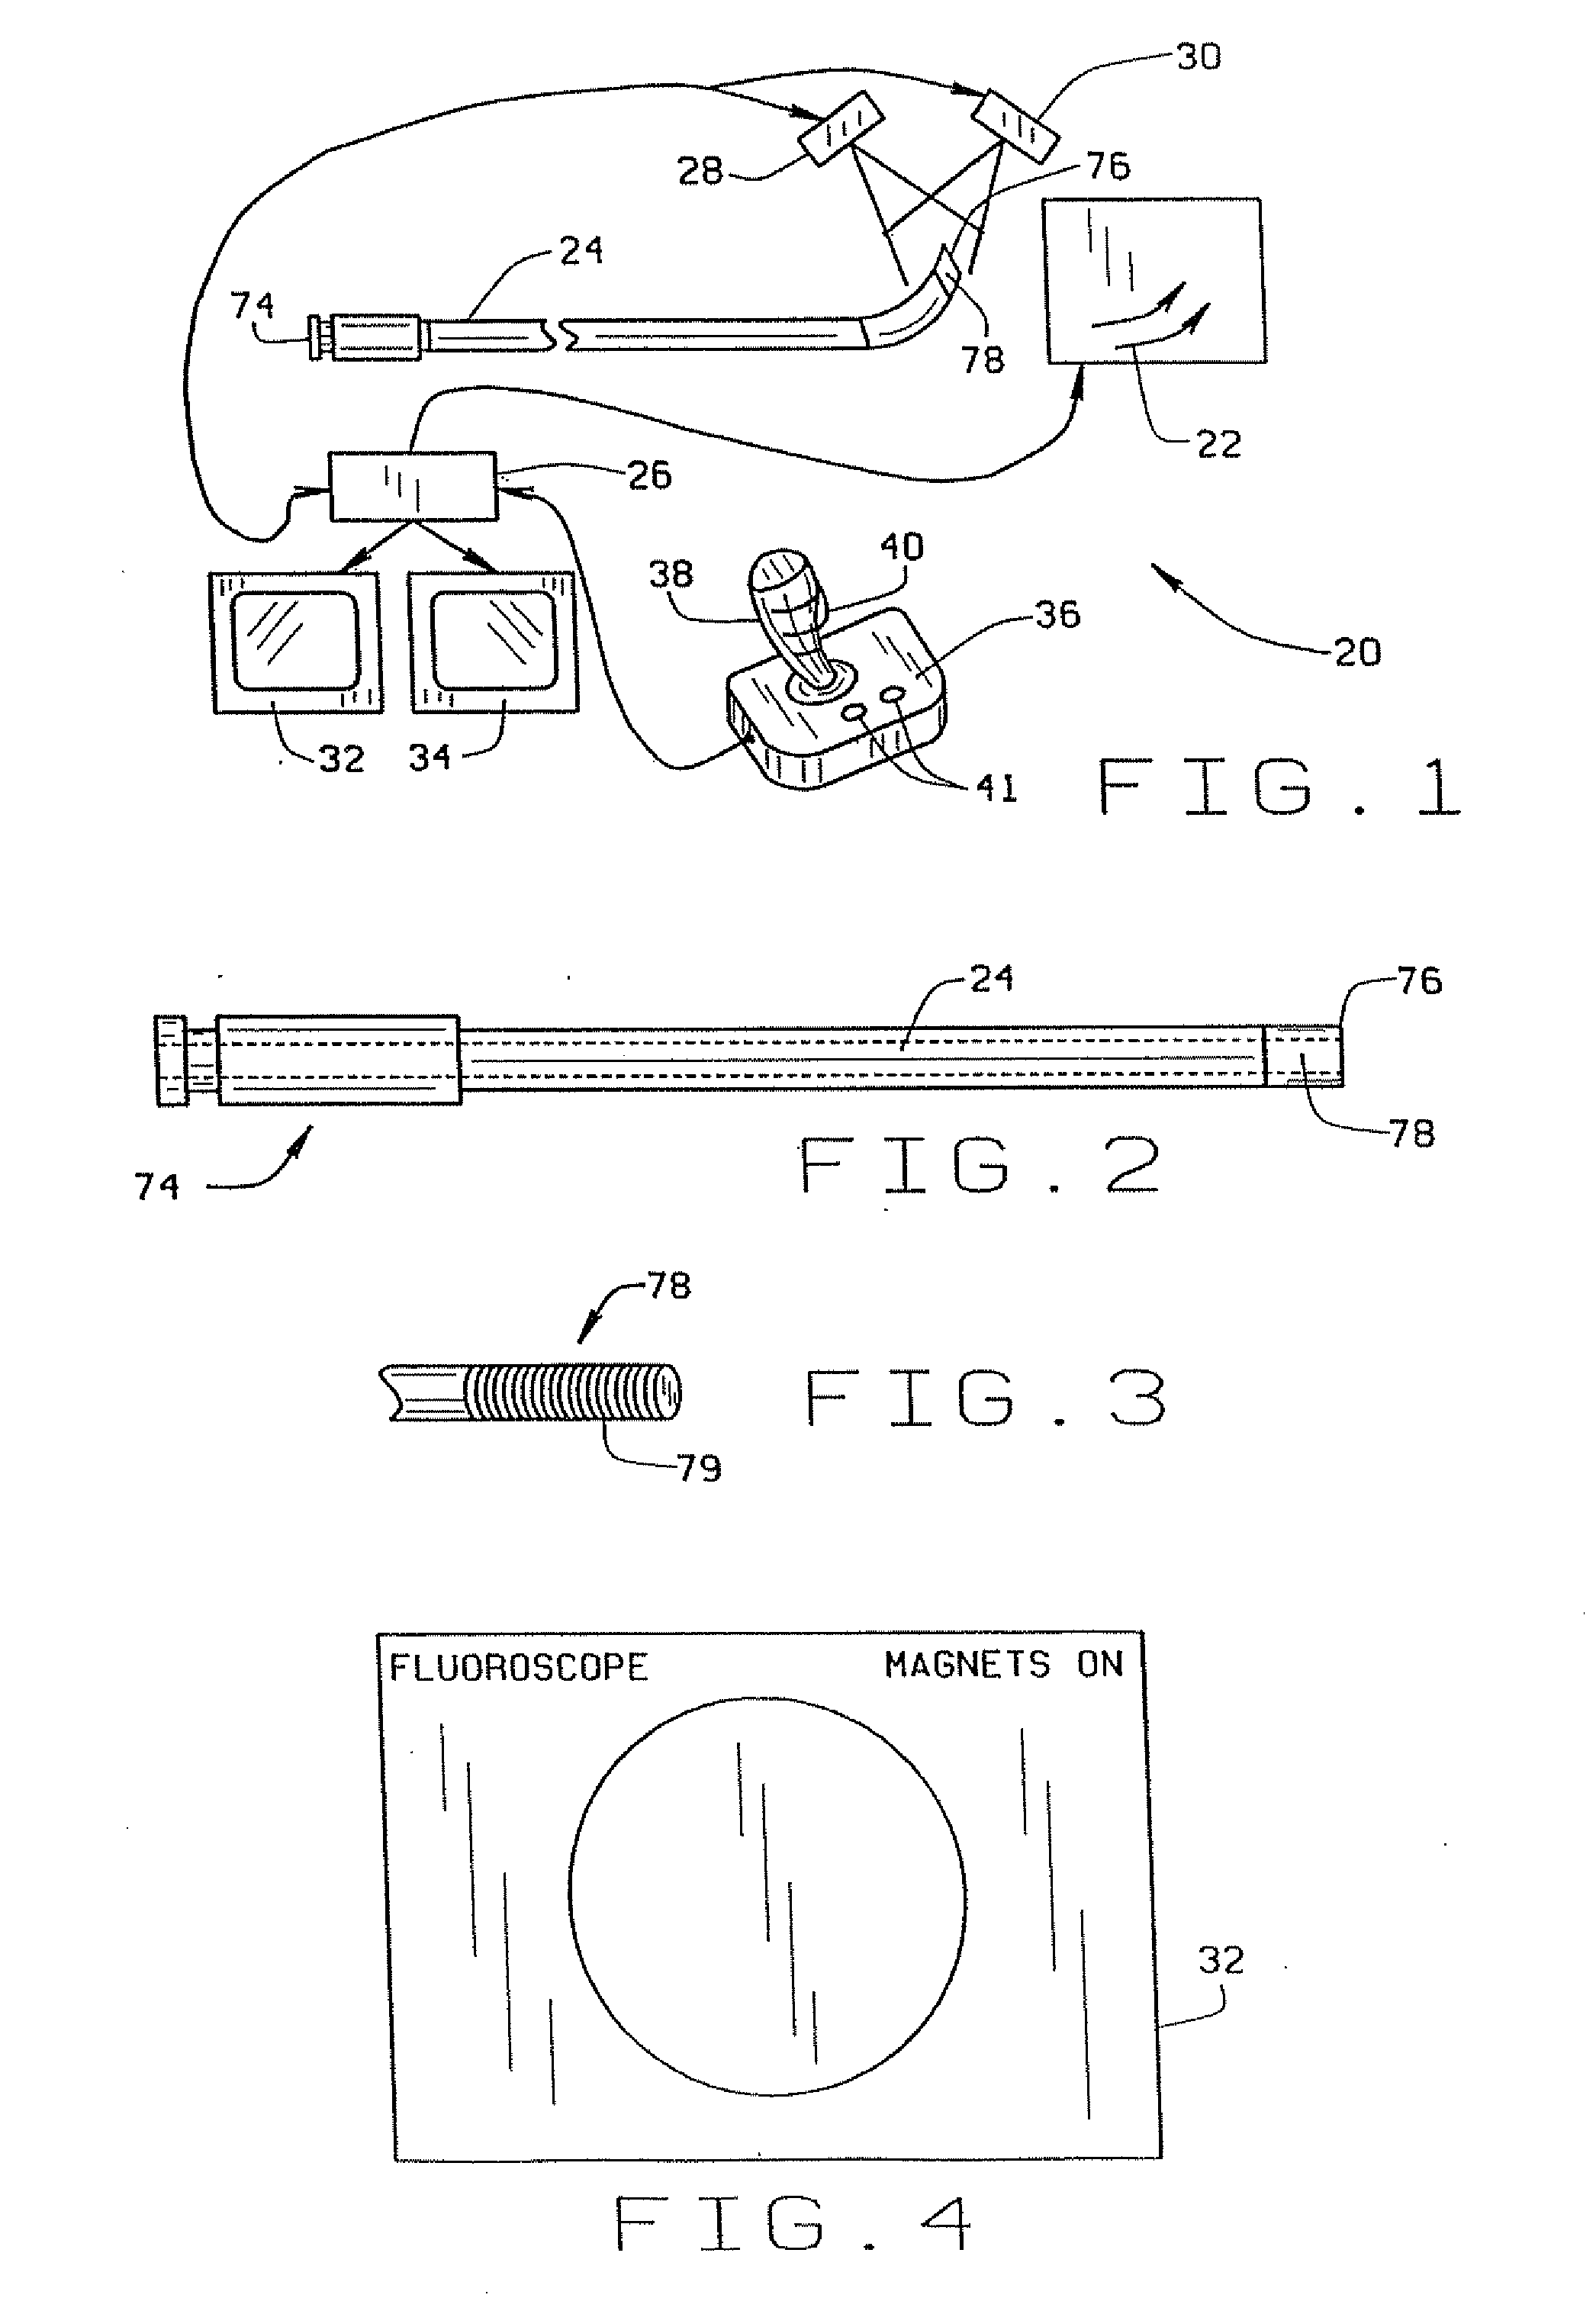 Method and apparatus for magnetically controlling catheters in body lumens and cavities